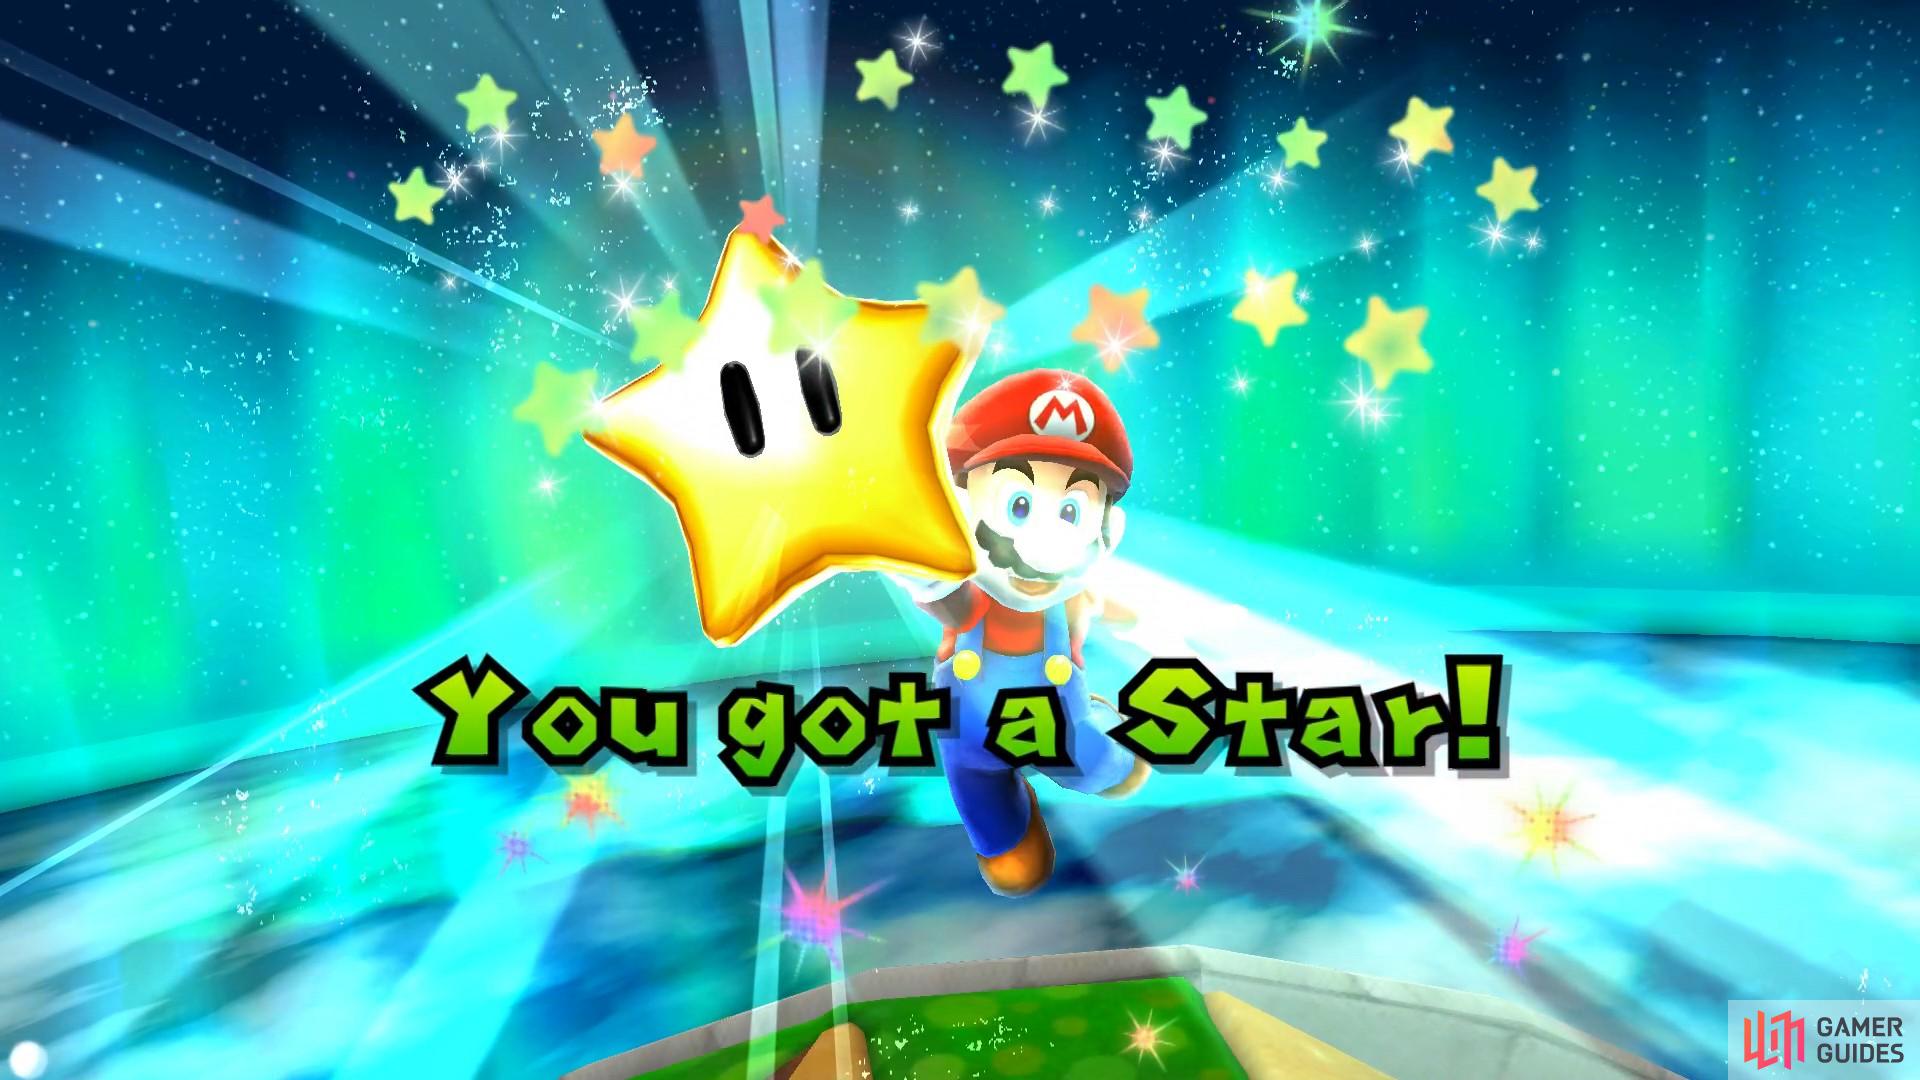 If you successfully catch all the bunnies, you’ll earn yourself a star!